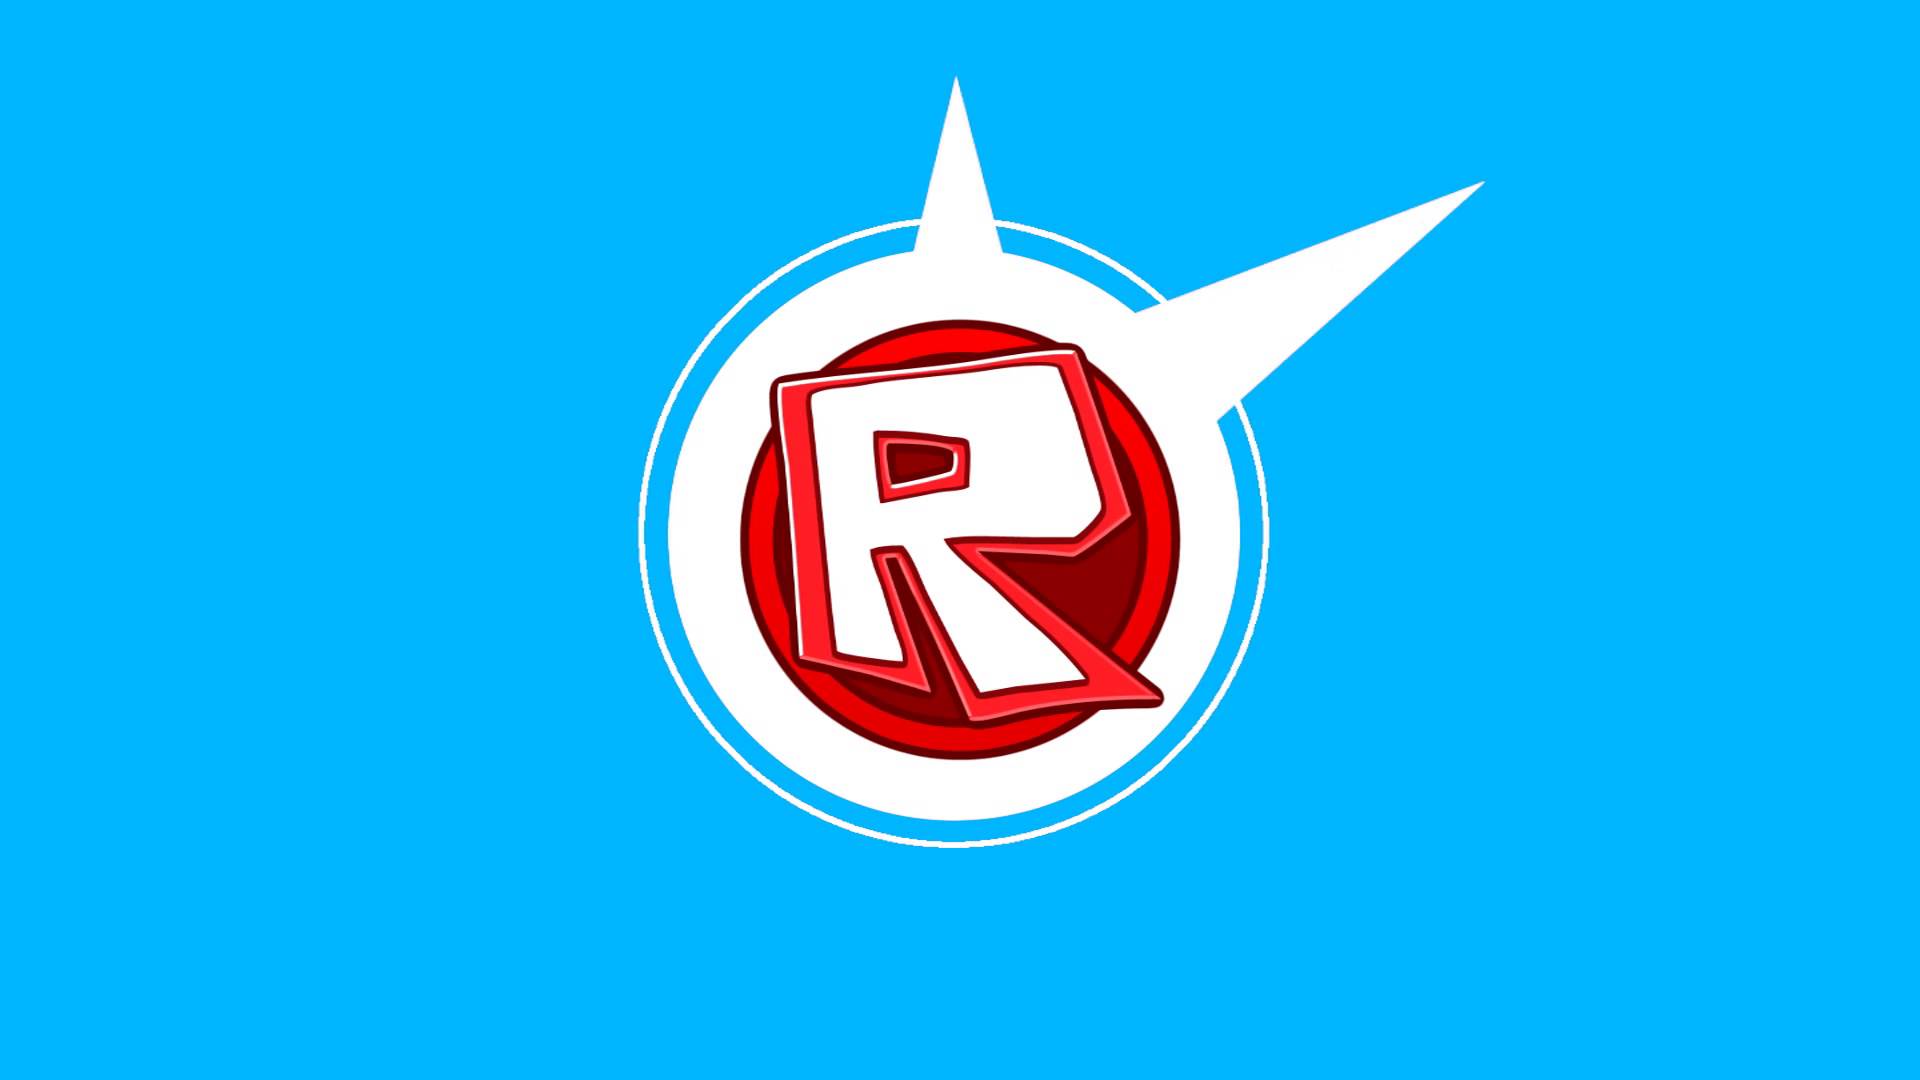 Roblox Sign Wallpapers Top Free Roblox Sign Backgrounds Wallpaperaccess - logo roblox sign